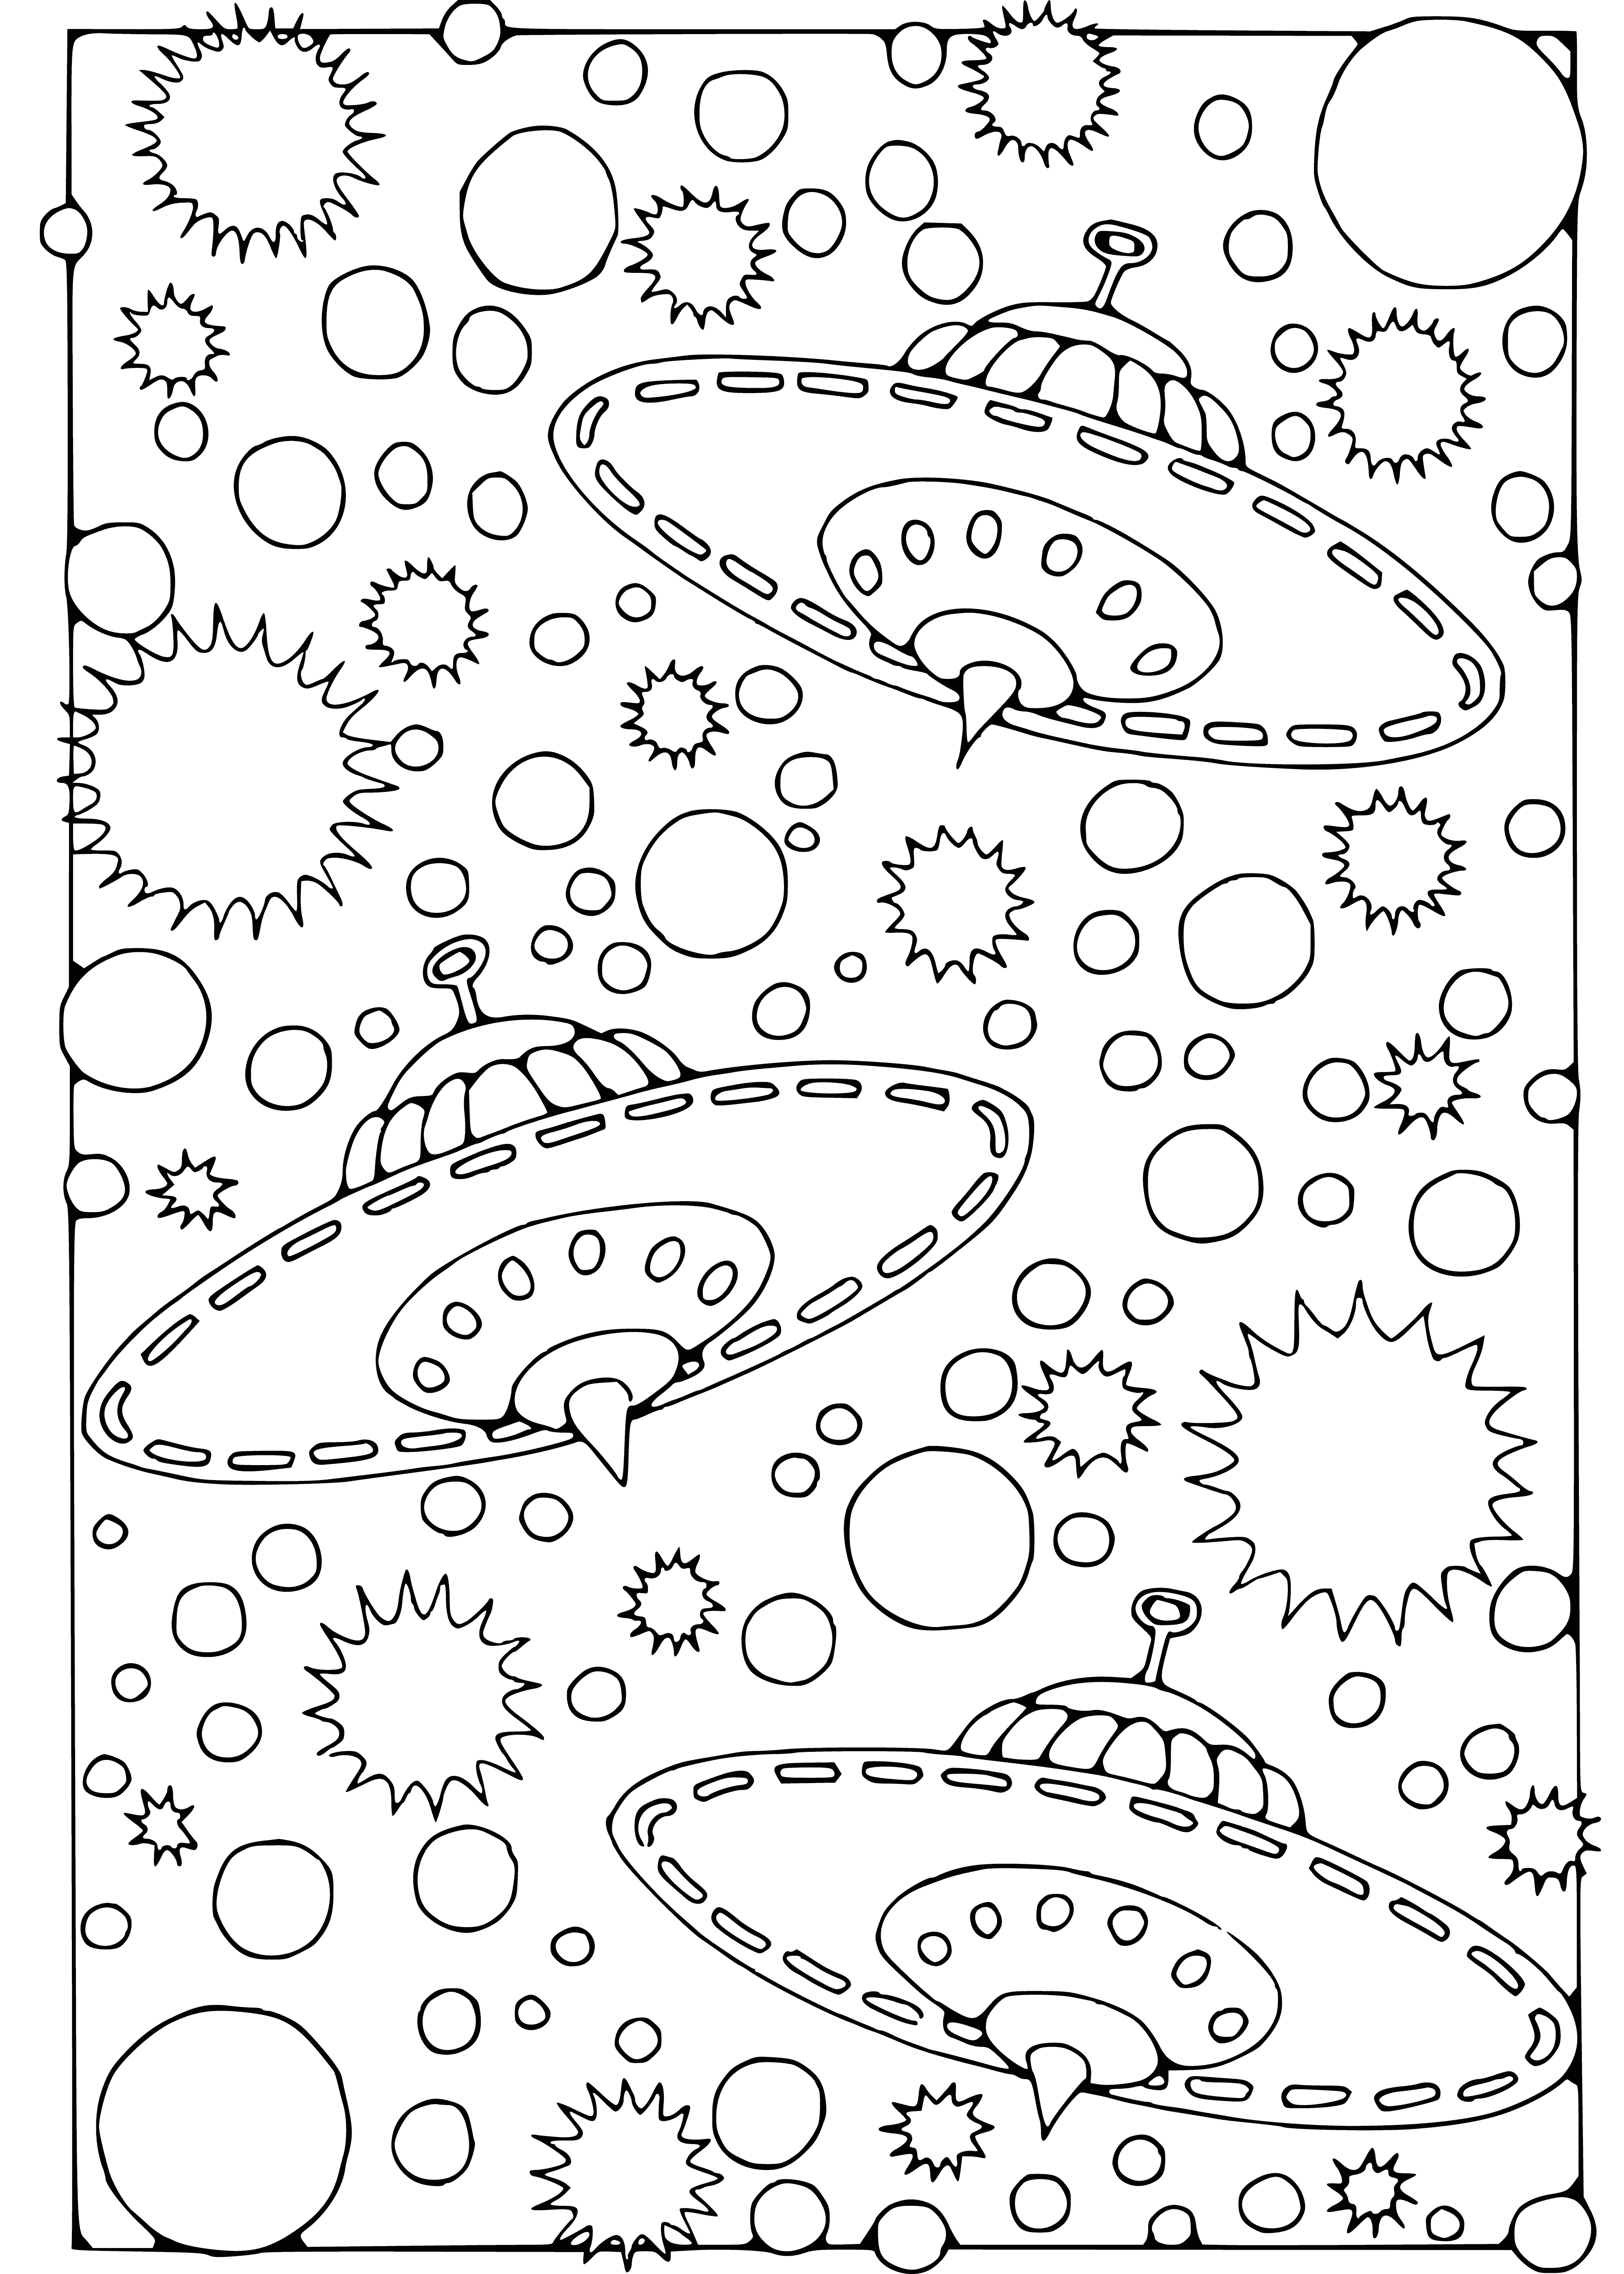 UFO coloring page